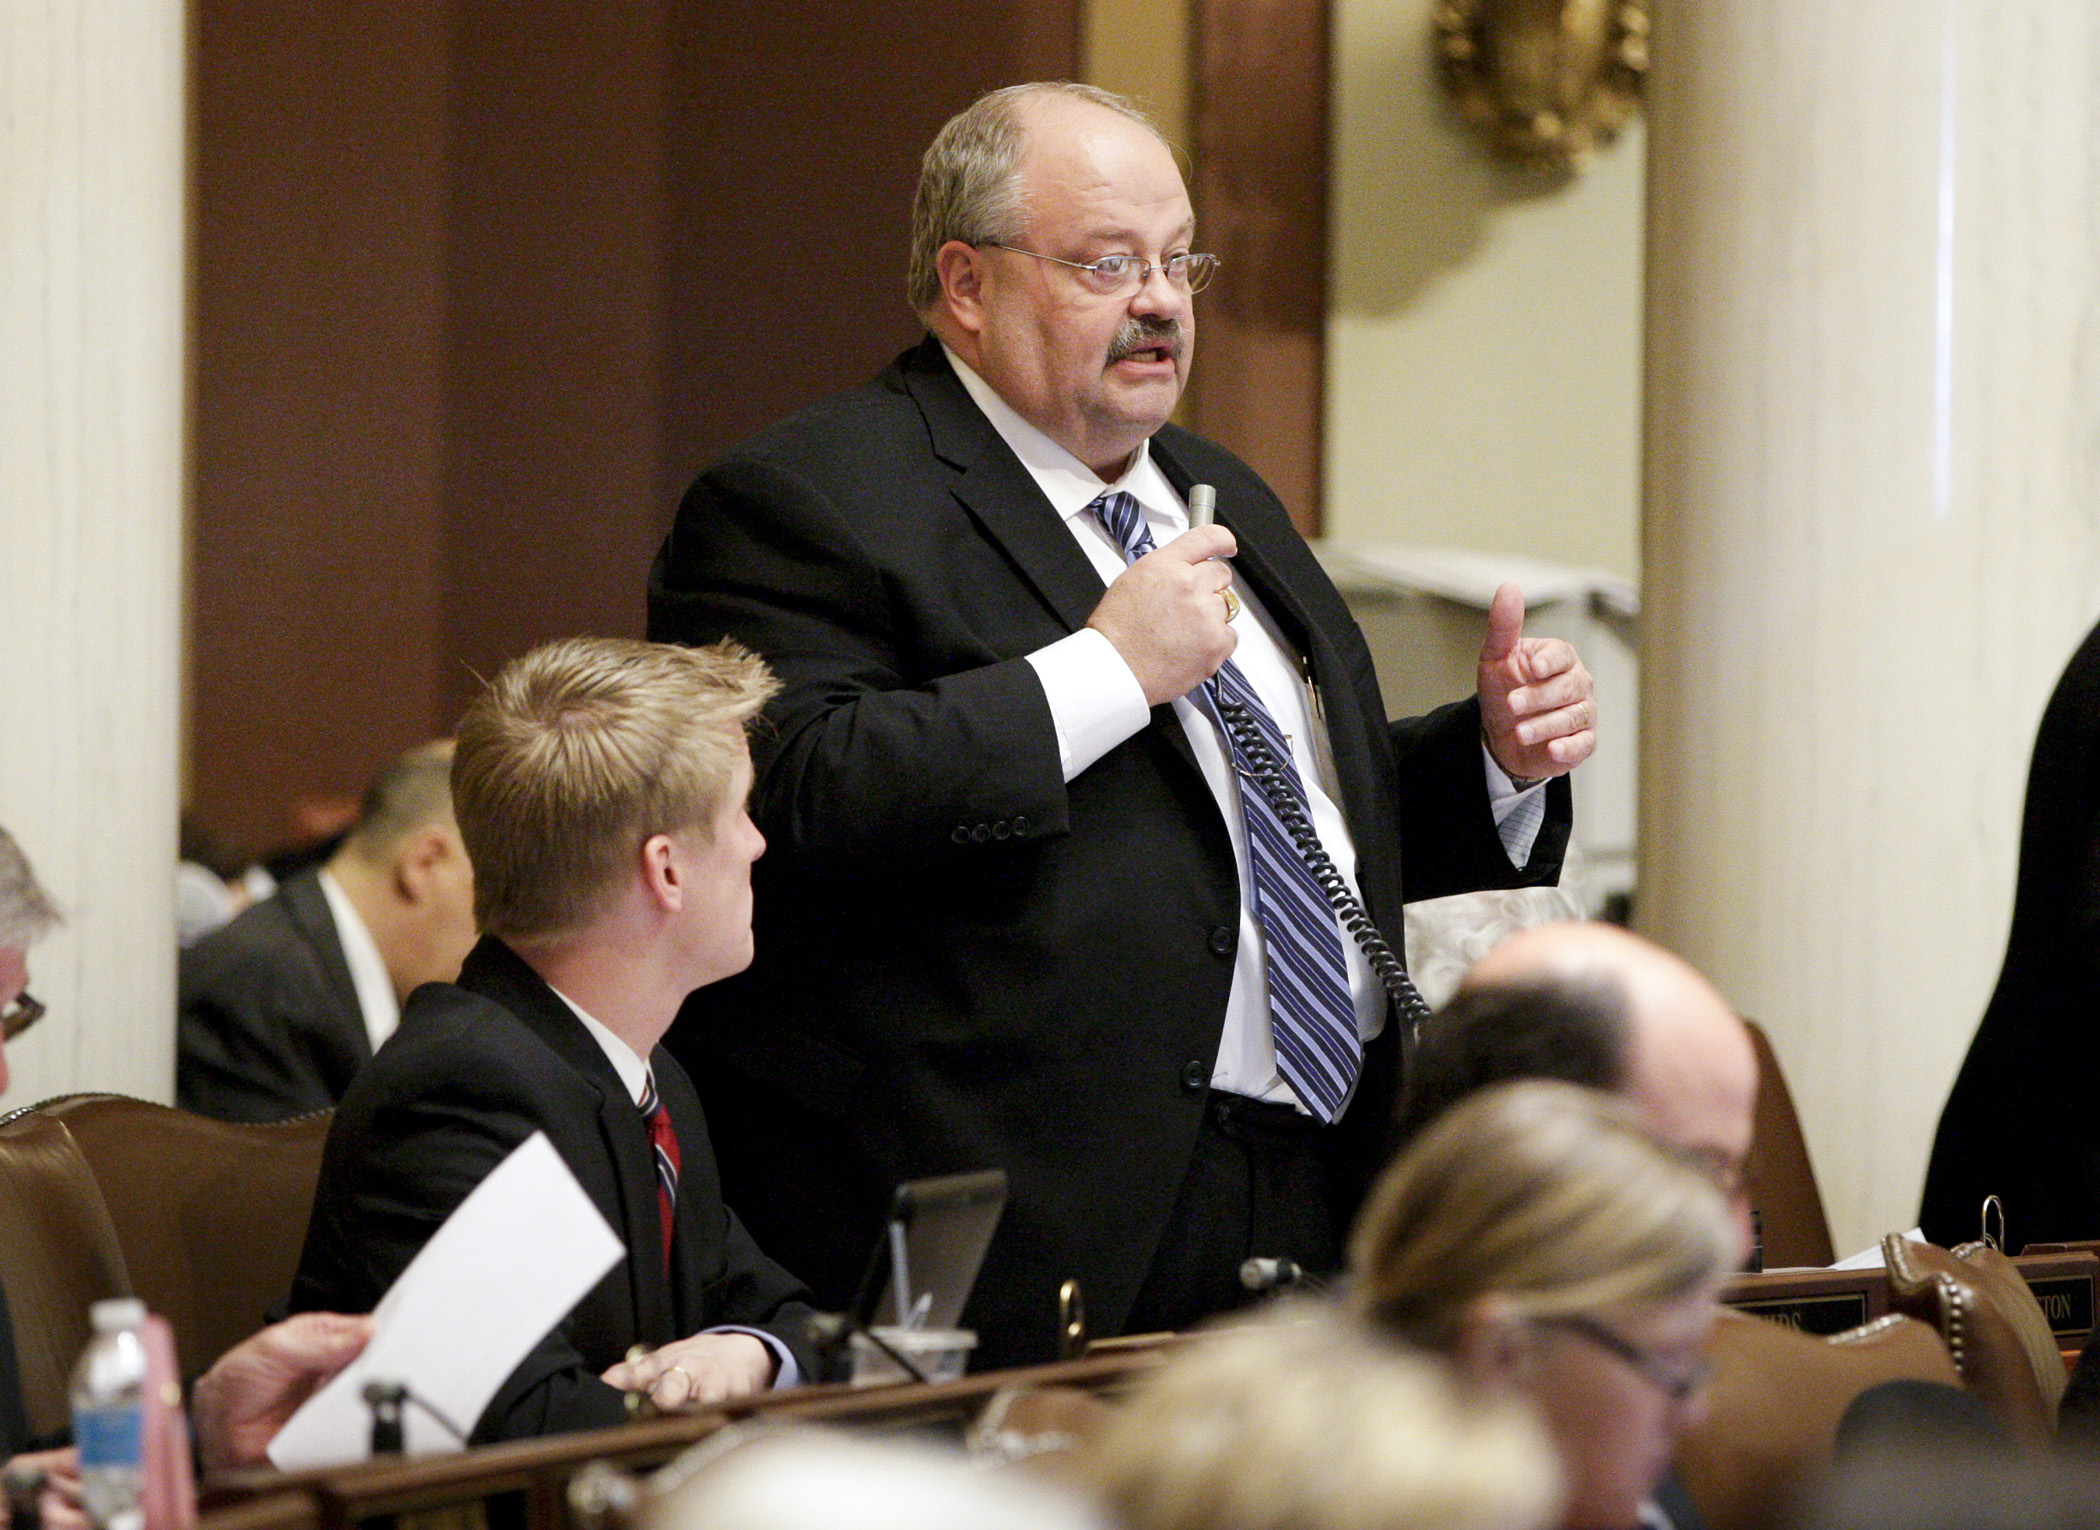 Rep. Greg Davids, chair of the House Taxes Committee, discusses an amendment to the omnibus tax bill, HF848, during April 29 debate on the House Floor. Photo by Paul Battaglia